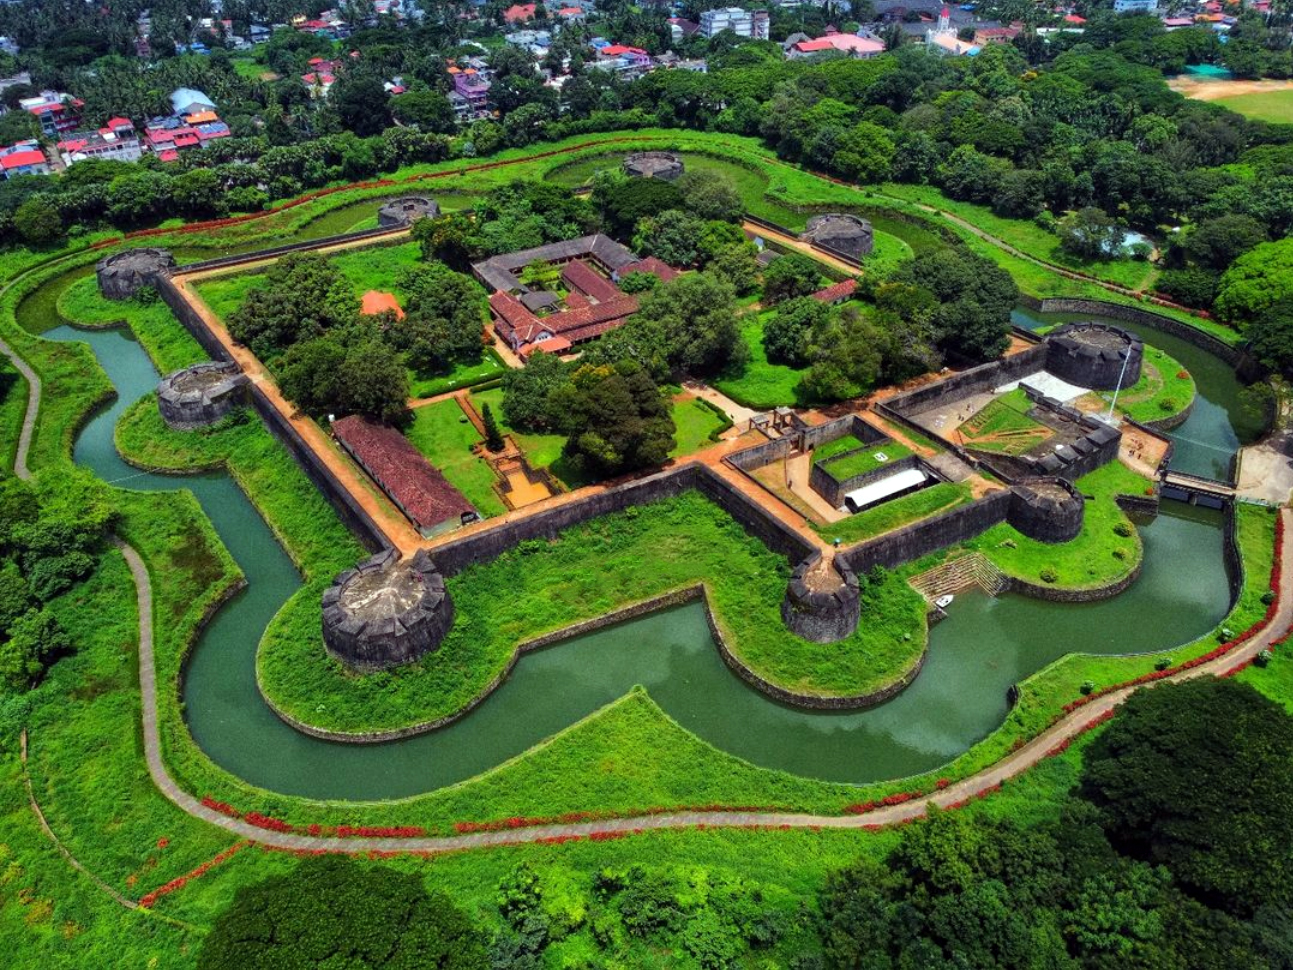 Palakkad Fort or Tipu Sultan Fort is a historic fort in Kerala